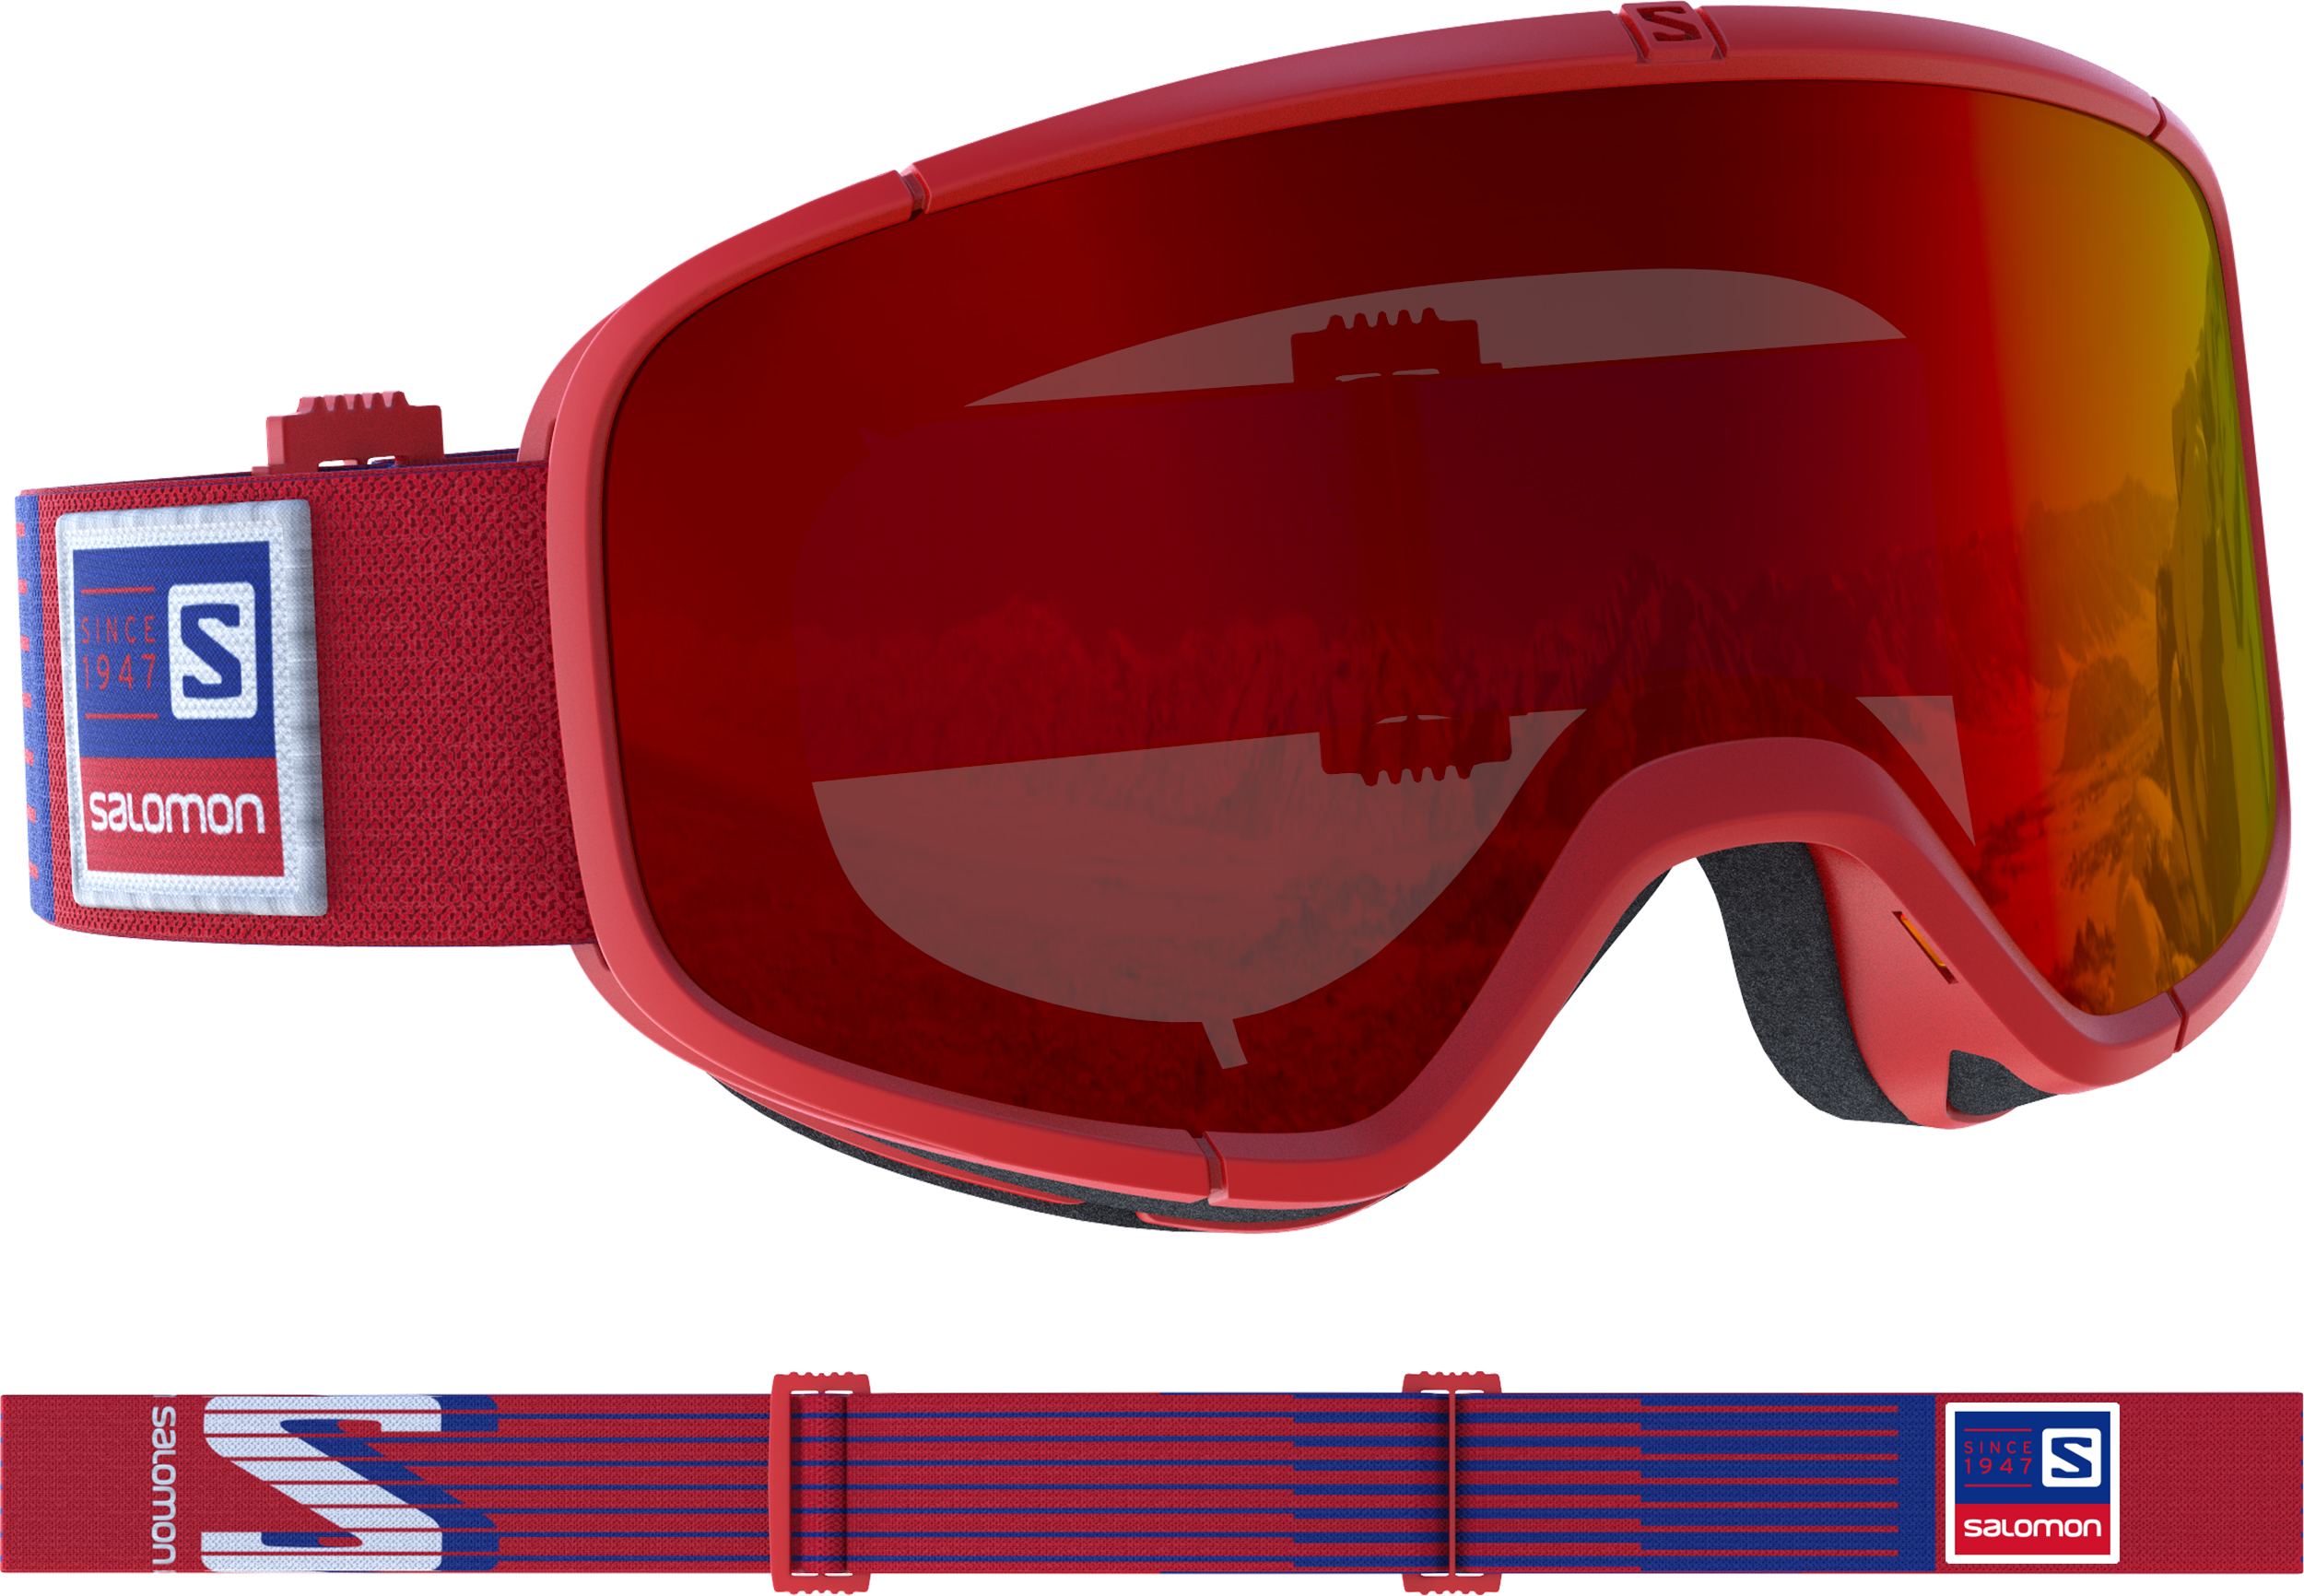 COMPLETE OUR 2018 SURVEY TO WIN A PAIR OF SALOMON FOUR SEVEN GOGGLES ...